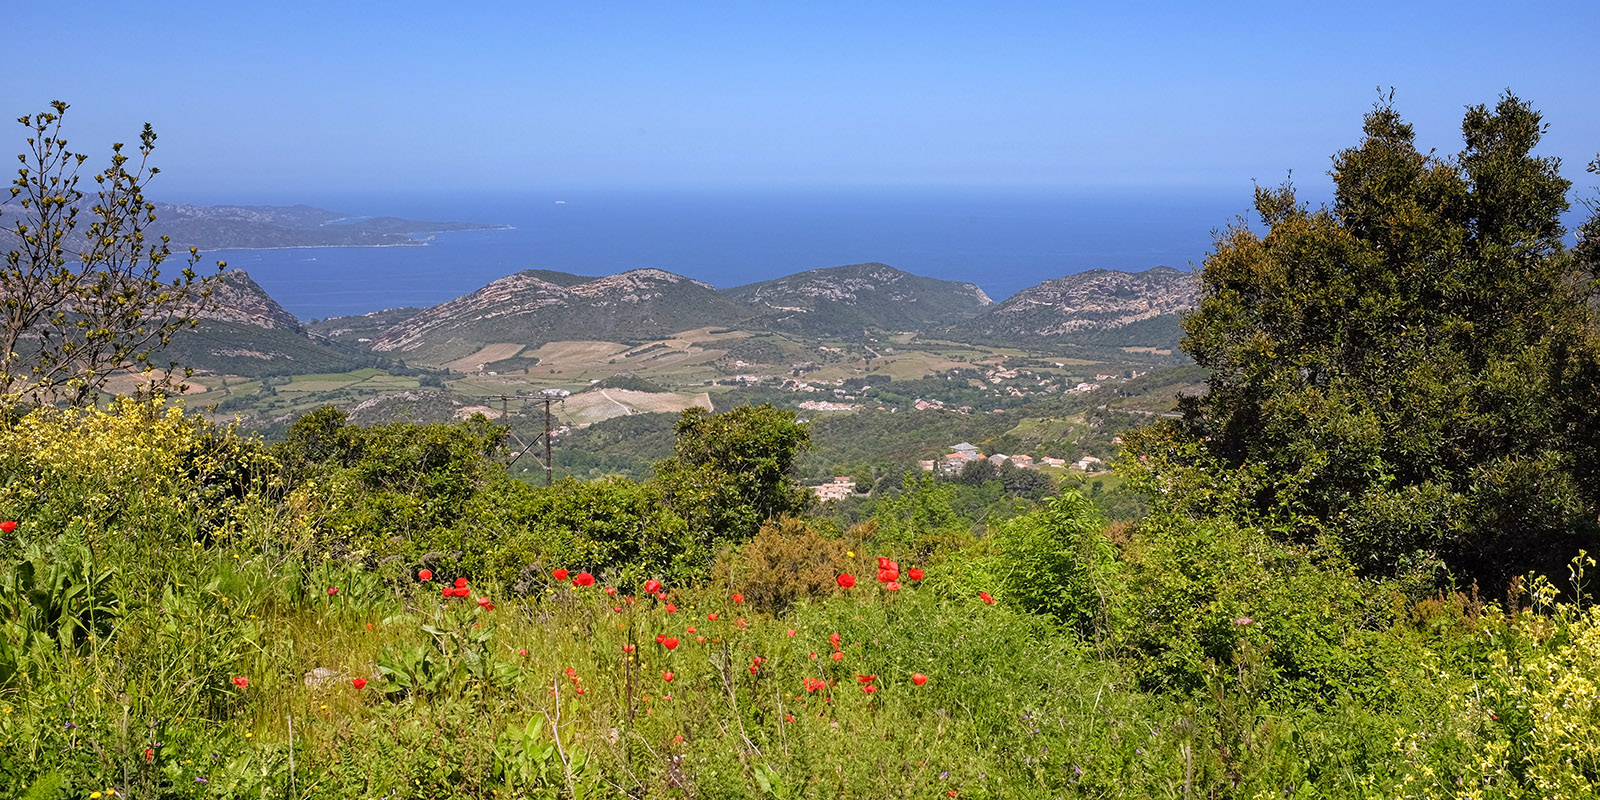 On the road between Saint-Florent and Bastia